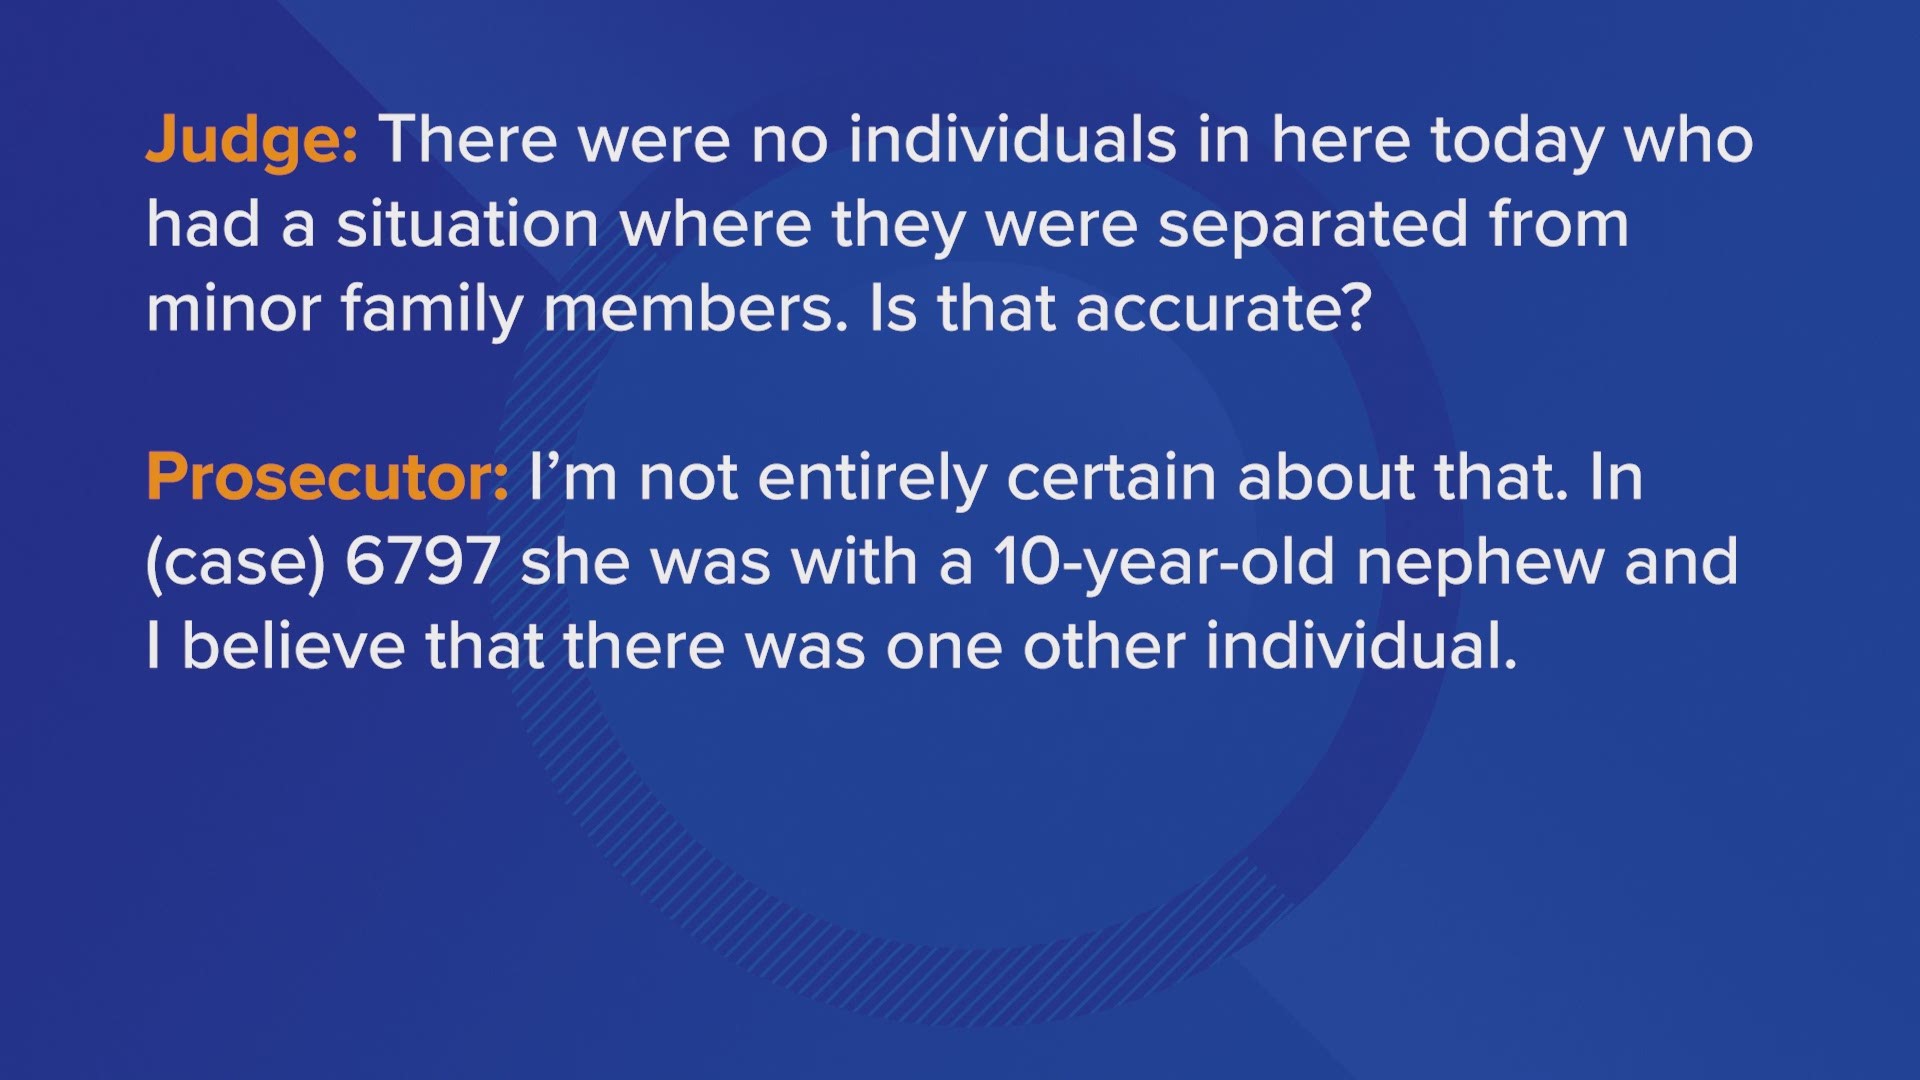 By mid-June, President Trump issued an executive order ending family separations.  However, the term “family” was for mother/father and child.  It didn’t cover extended family members, including grandparents, aunts/uncles nor step-children.